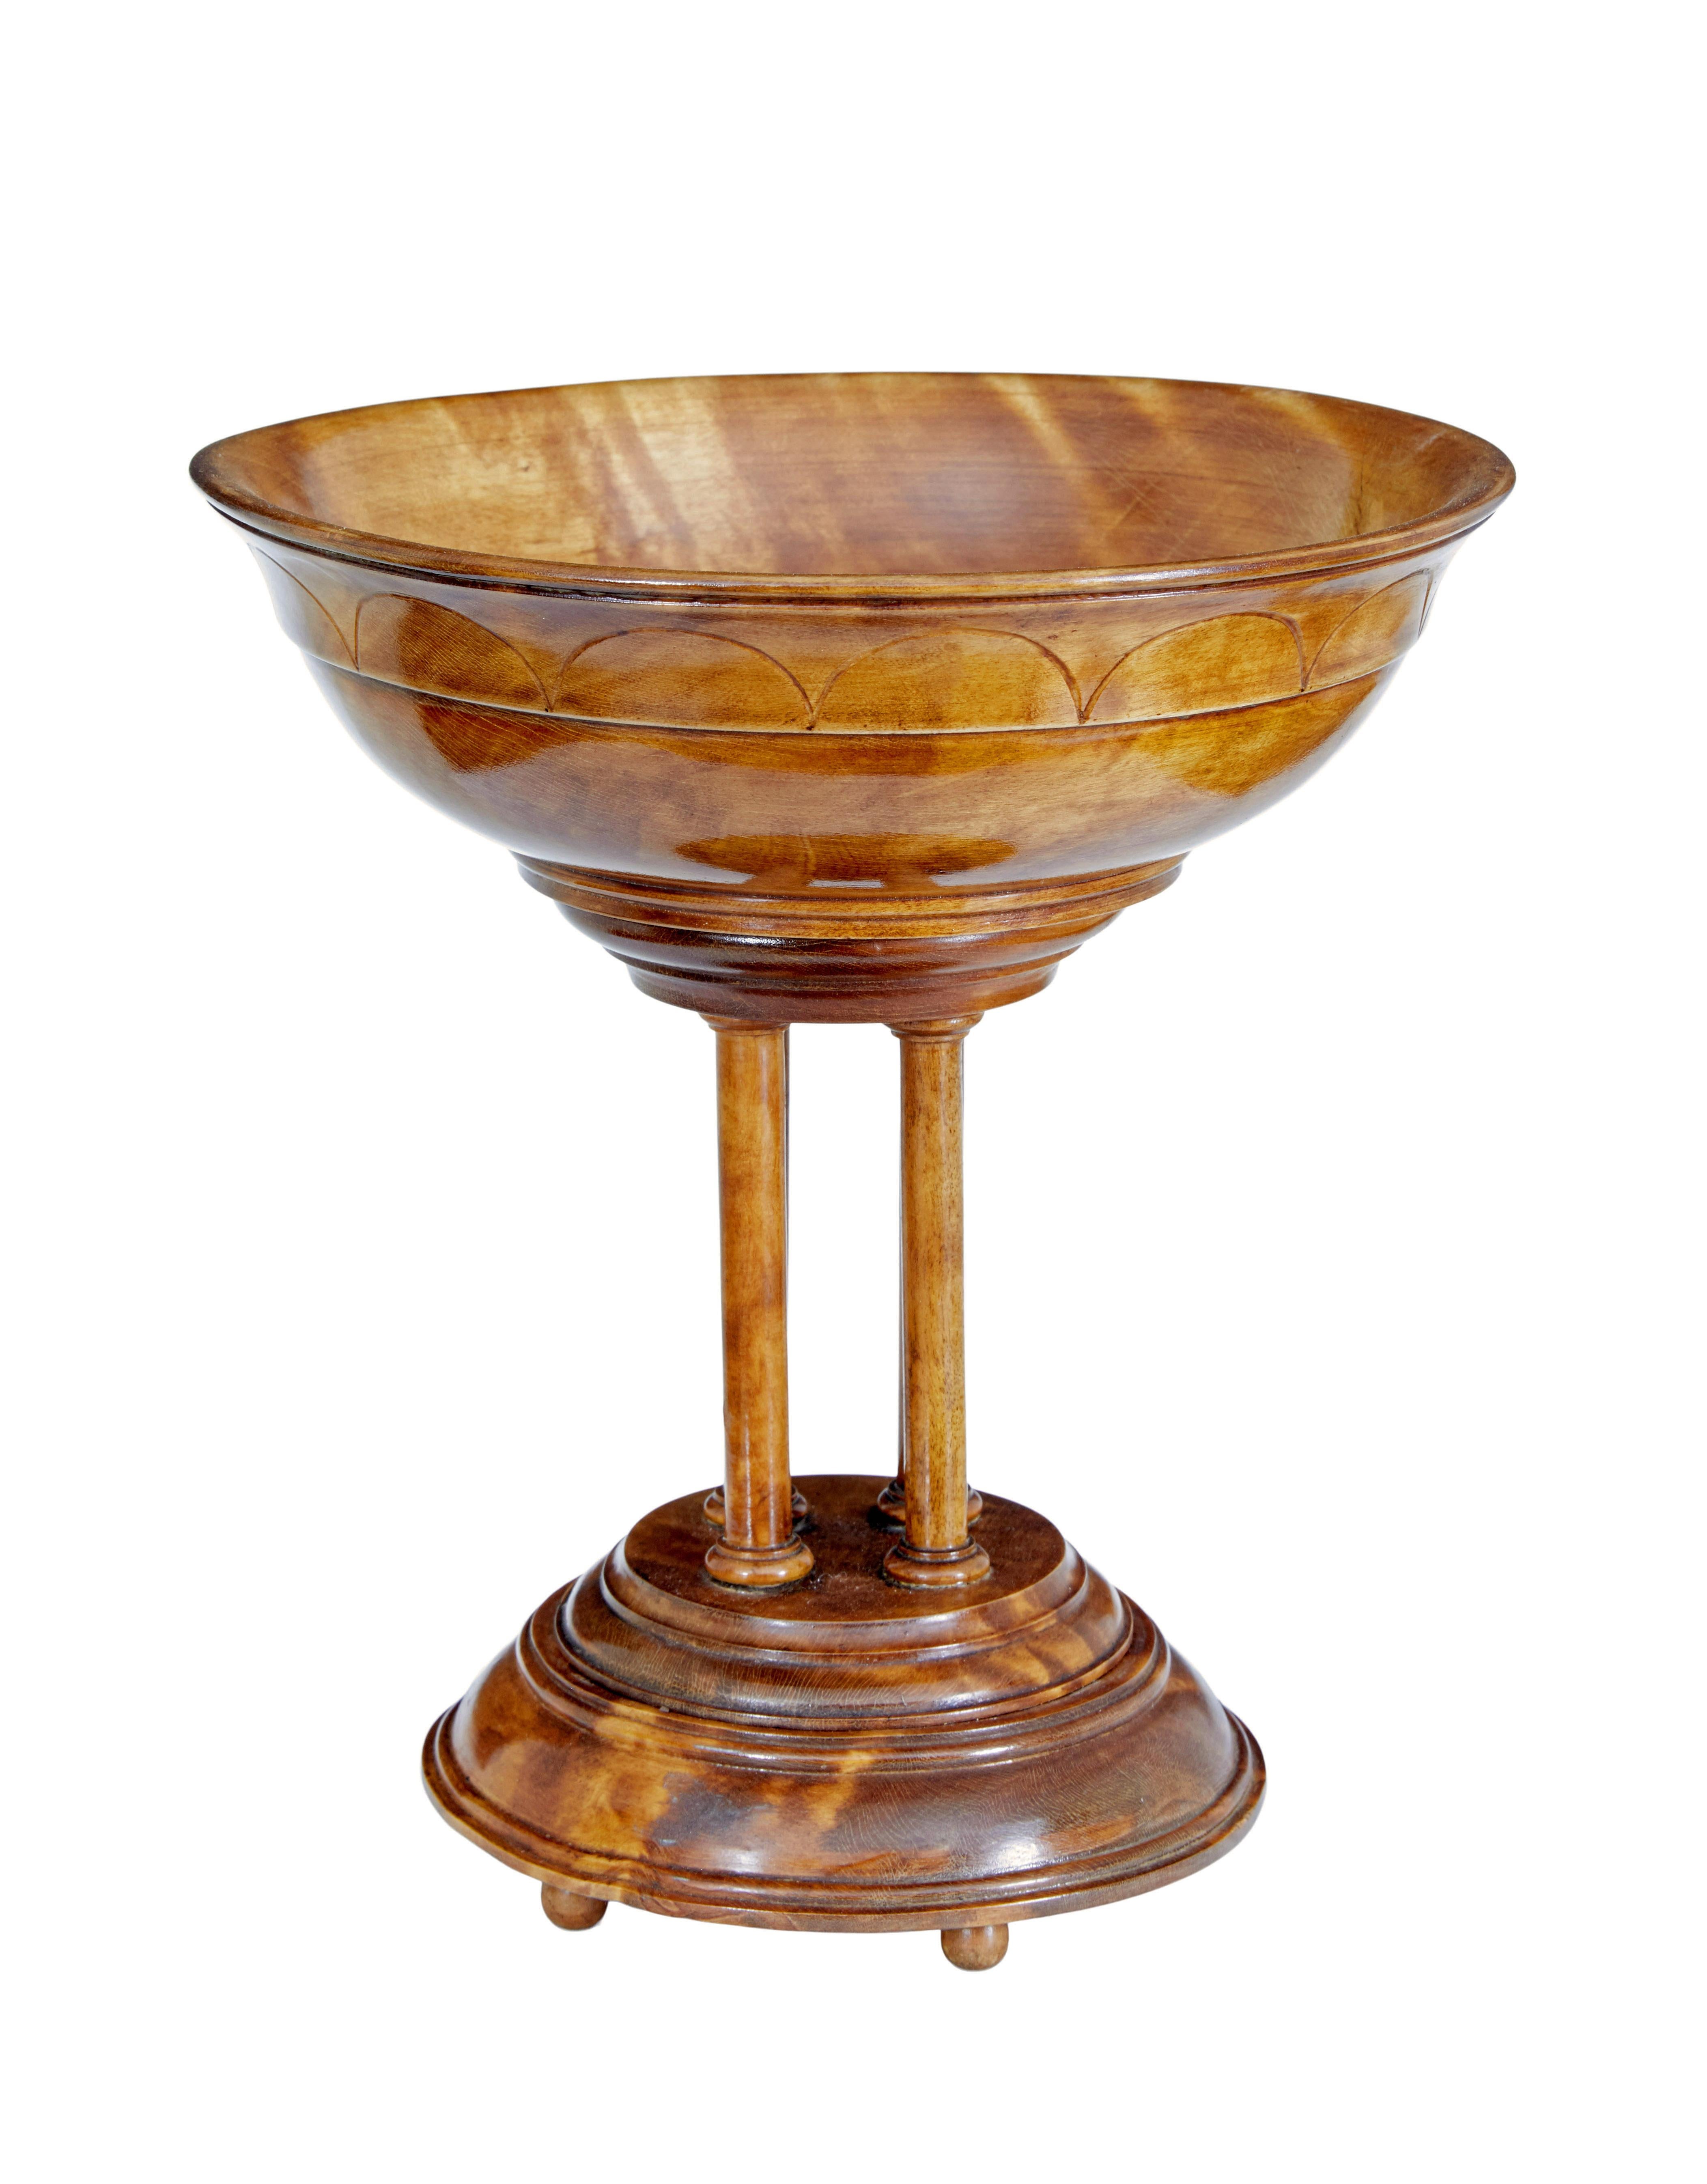 19th century Italian carved walnut tazza circa 1880.

Beautiful italian cup/tazza with good patina. Carved cup and base united by 4 columns.

Likely to be a piece aquired on the grand tour.

Minor surface marks, 1 small age split to side which is